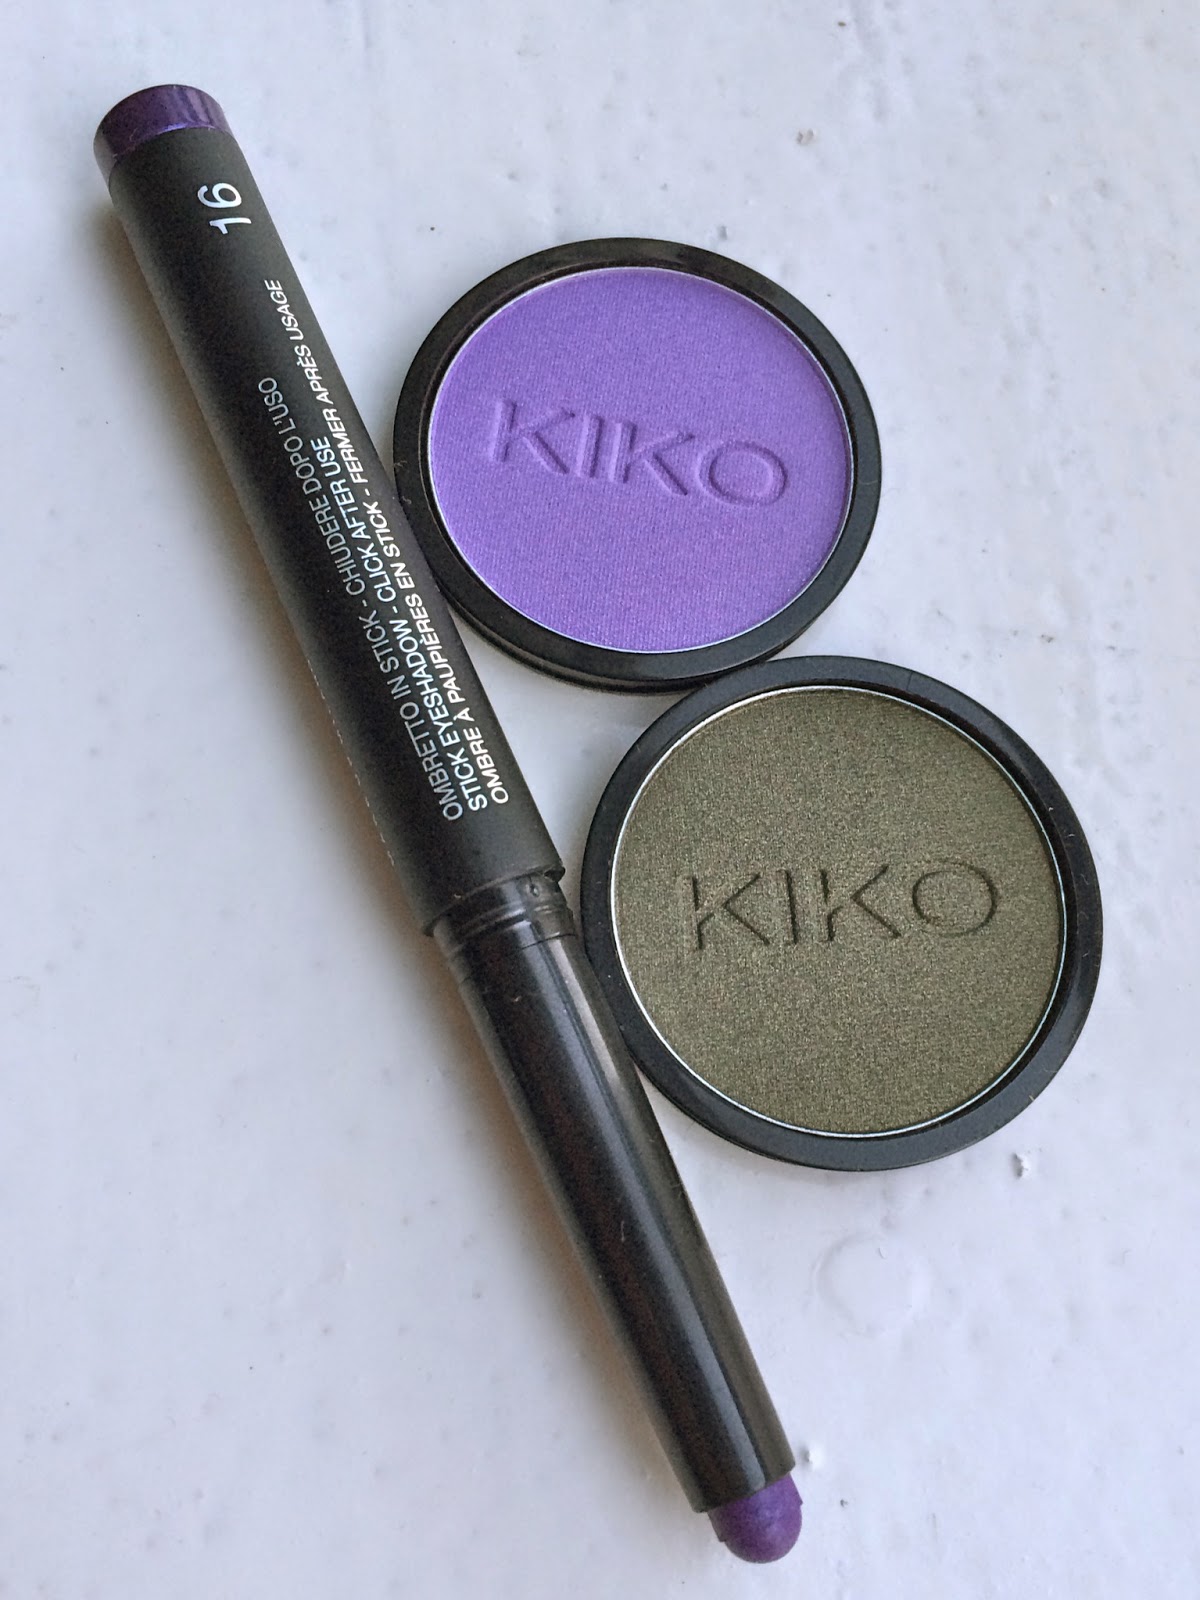 Auxiliary Beauty Beauty Abroad Part 5 Intro To Kiko Eyeshadow Swatches And First Impressions